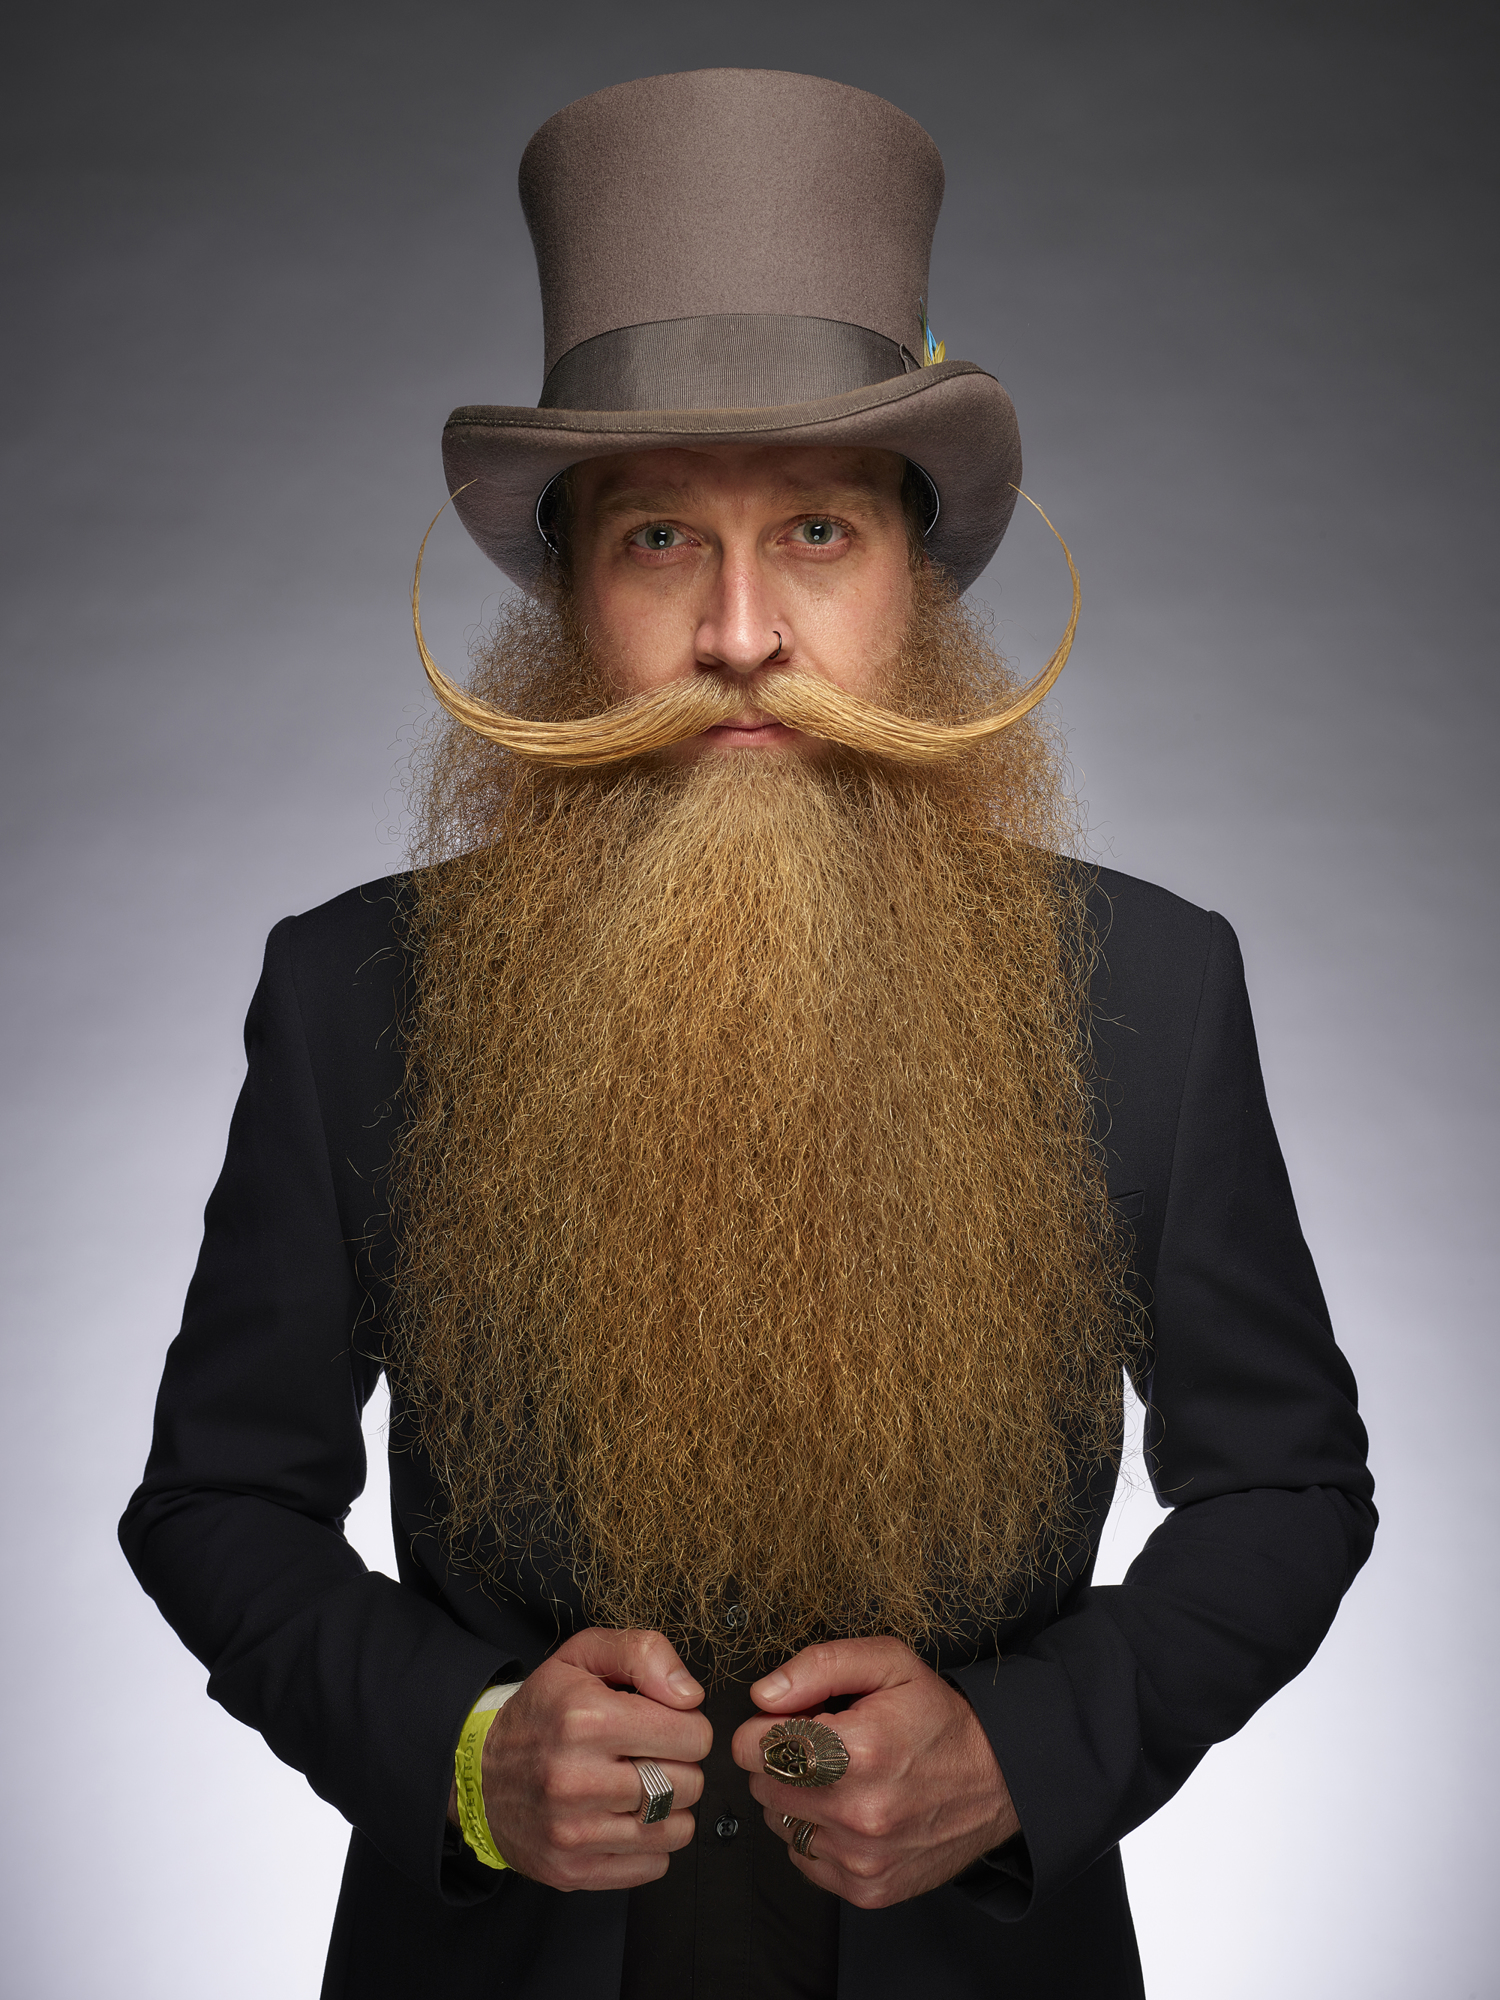 Scott Metts won the world competition in the Full Beard Styled Moustache category. Photo by Greg Anderson